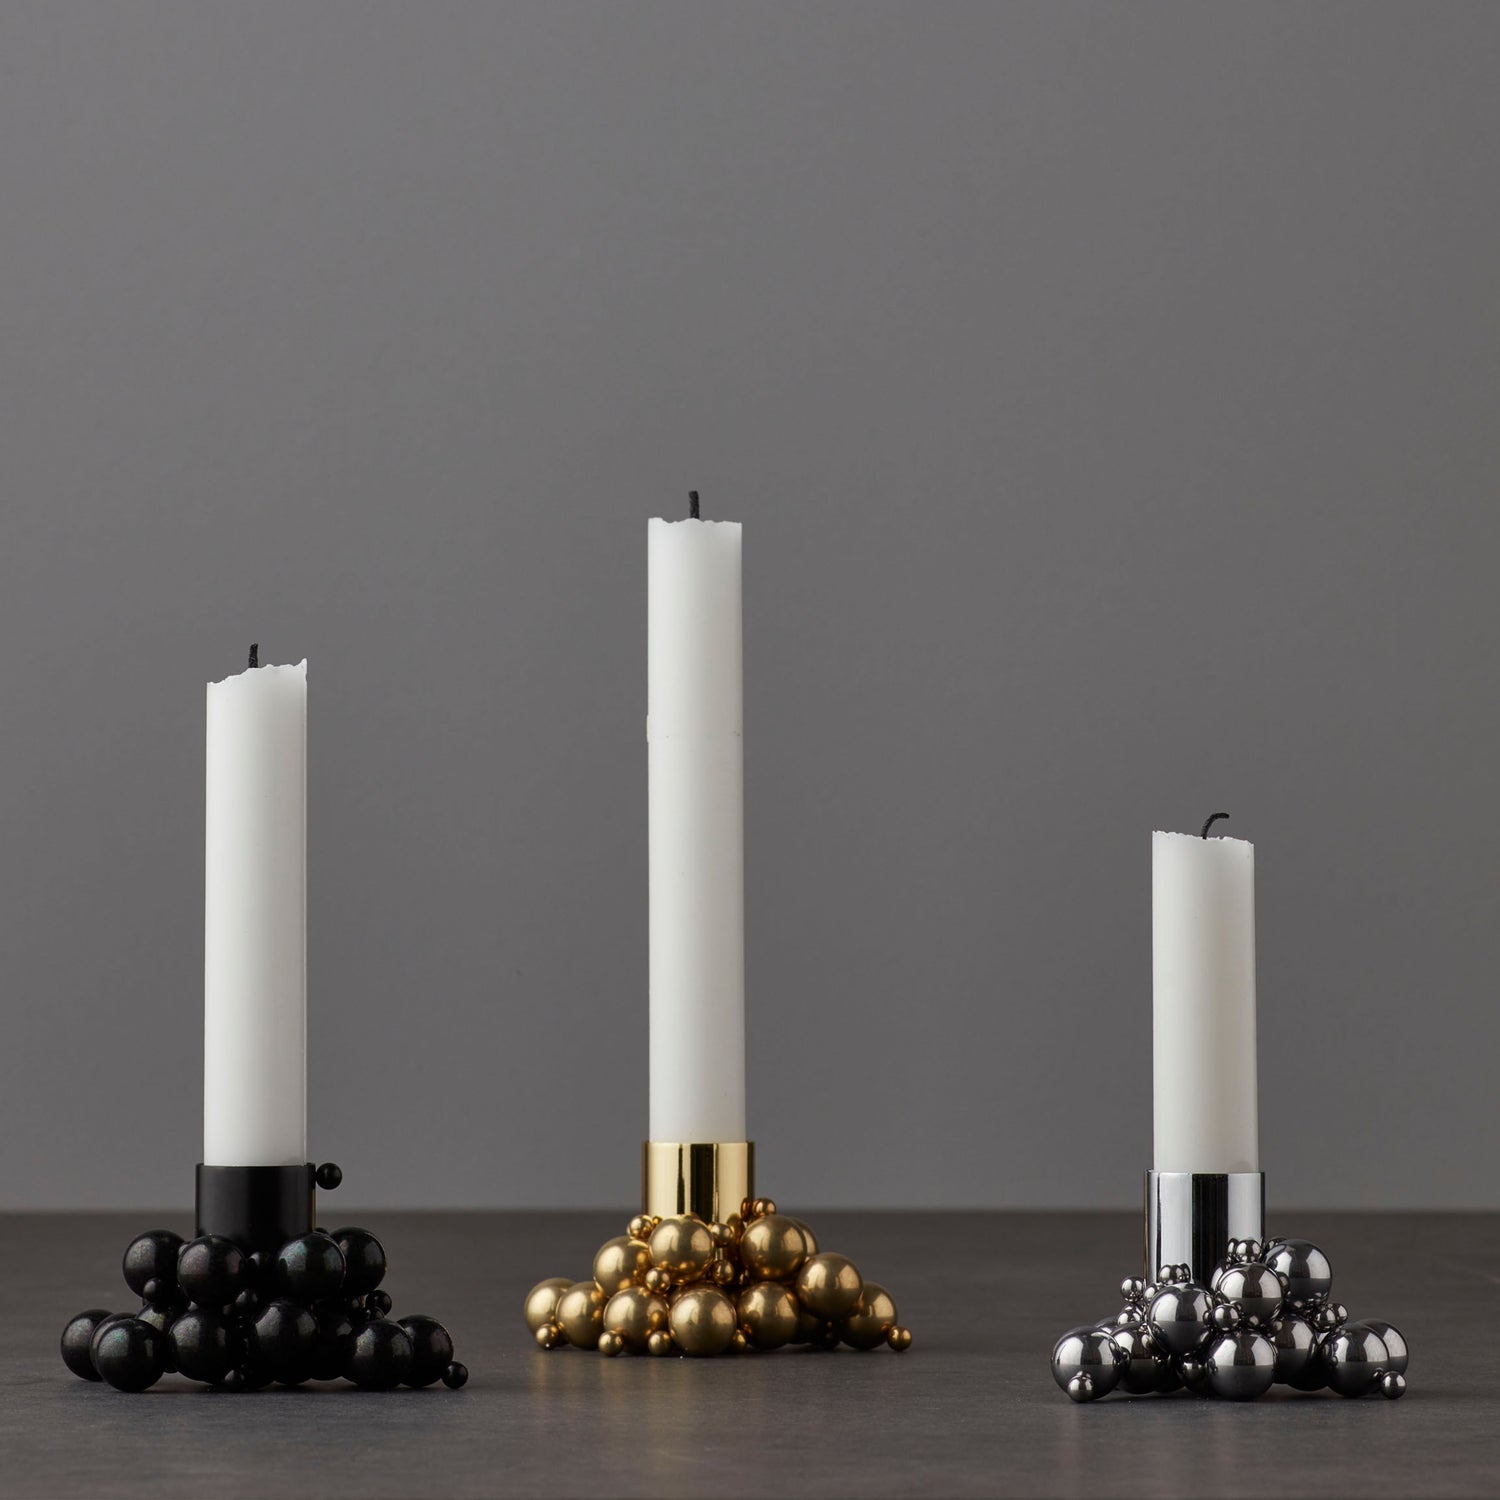 Would you want to try this? The design possibilities are endless with , floating christmas candle